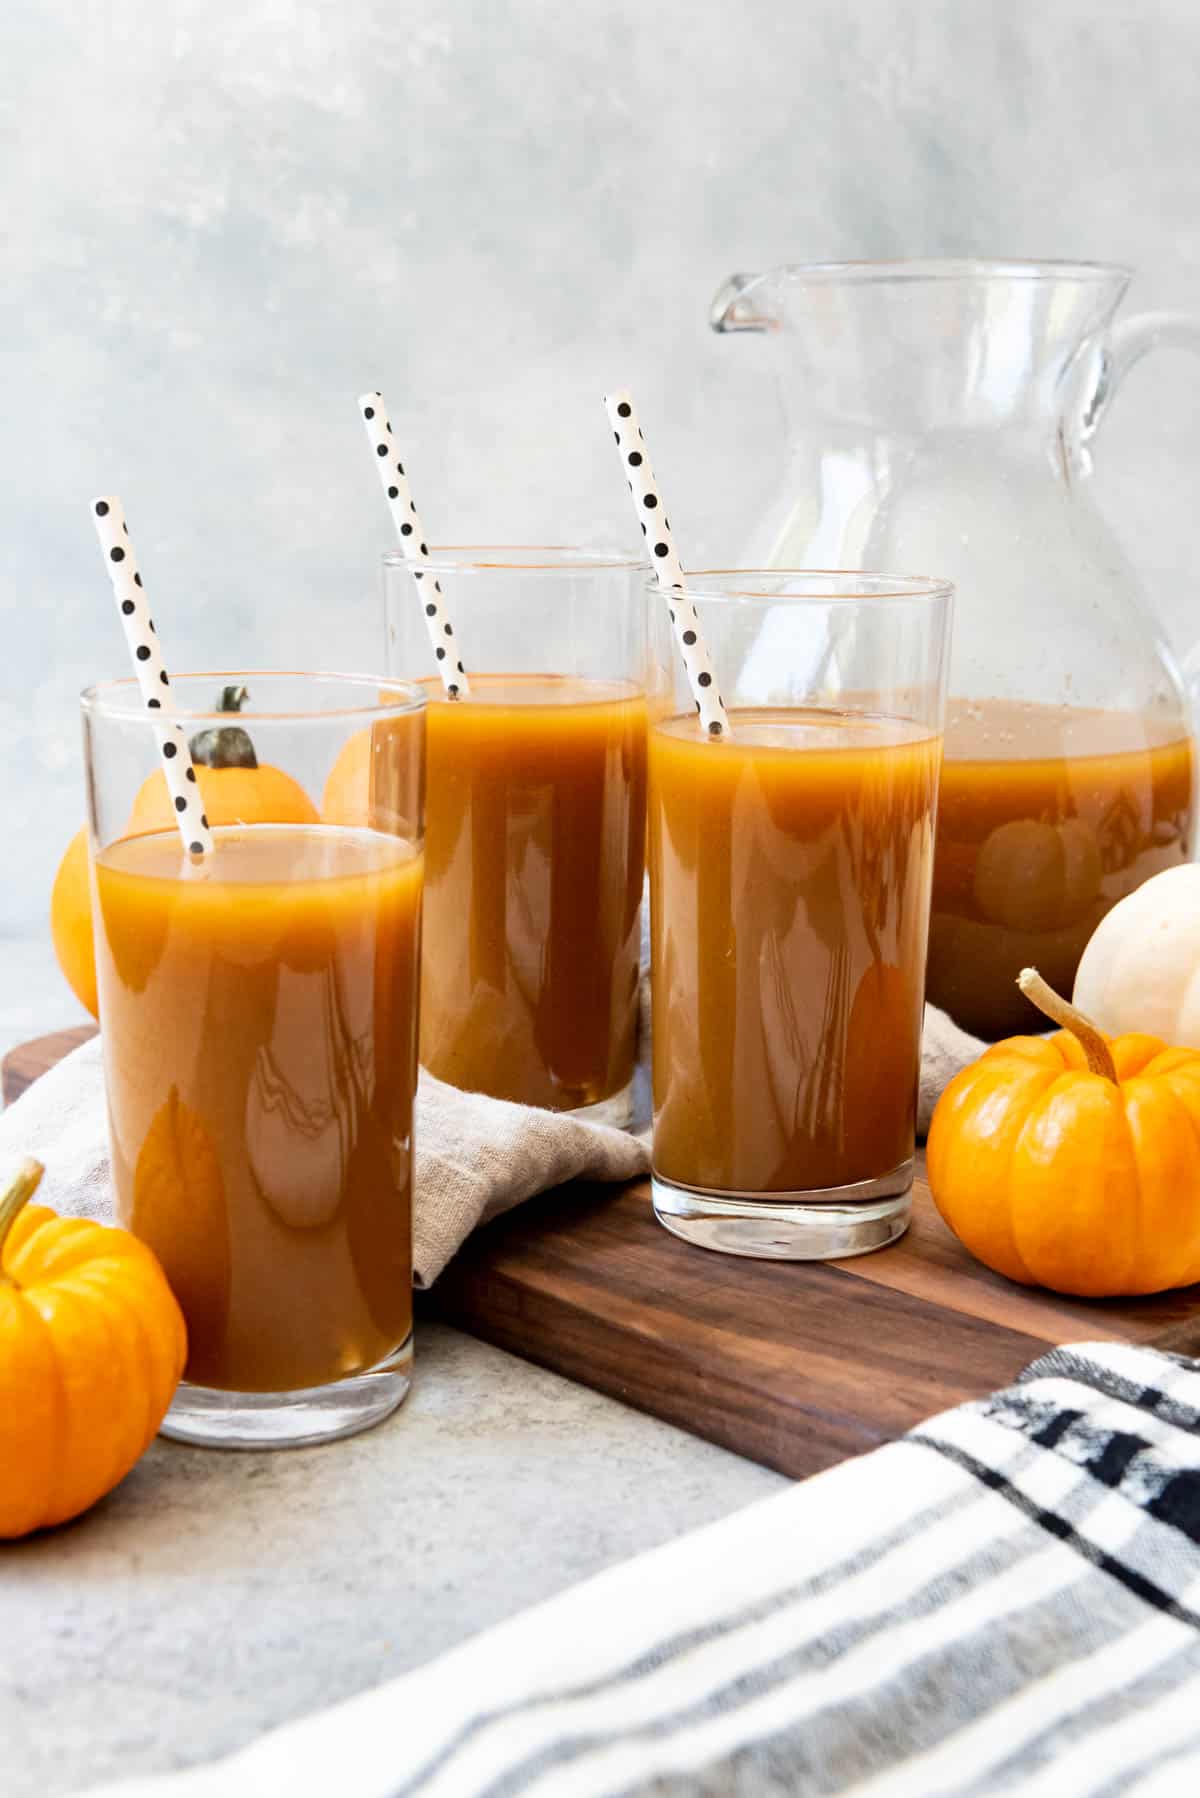 An image of glasses of chilled pumpkin juice made with apple cider, pumpkin puree, and pumpkin spice.